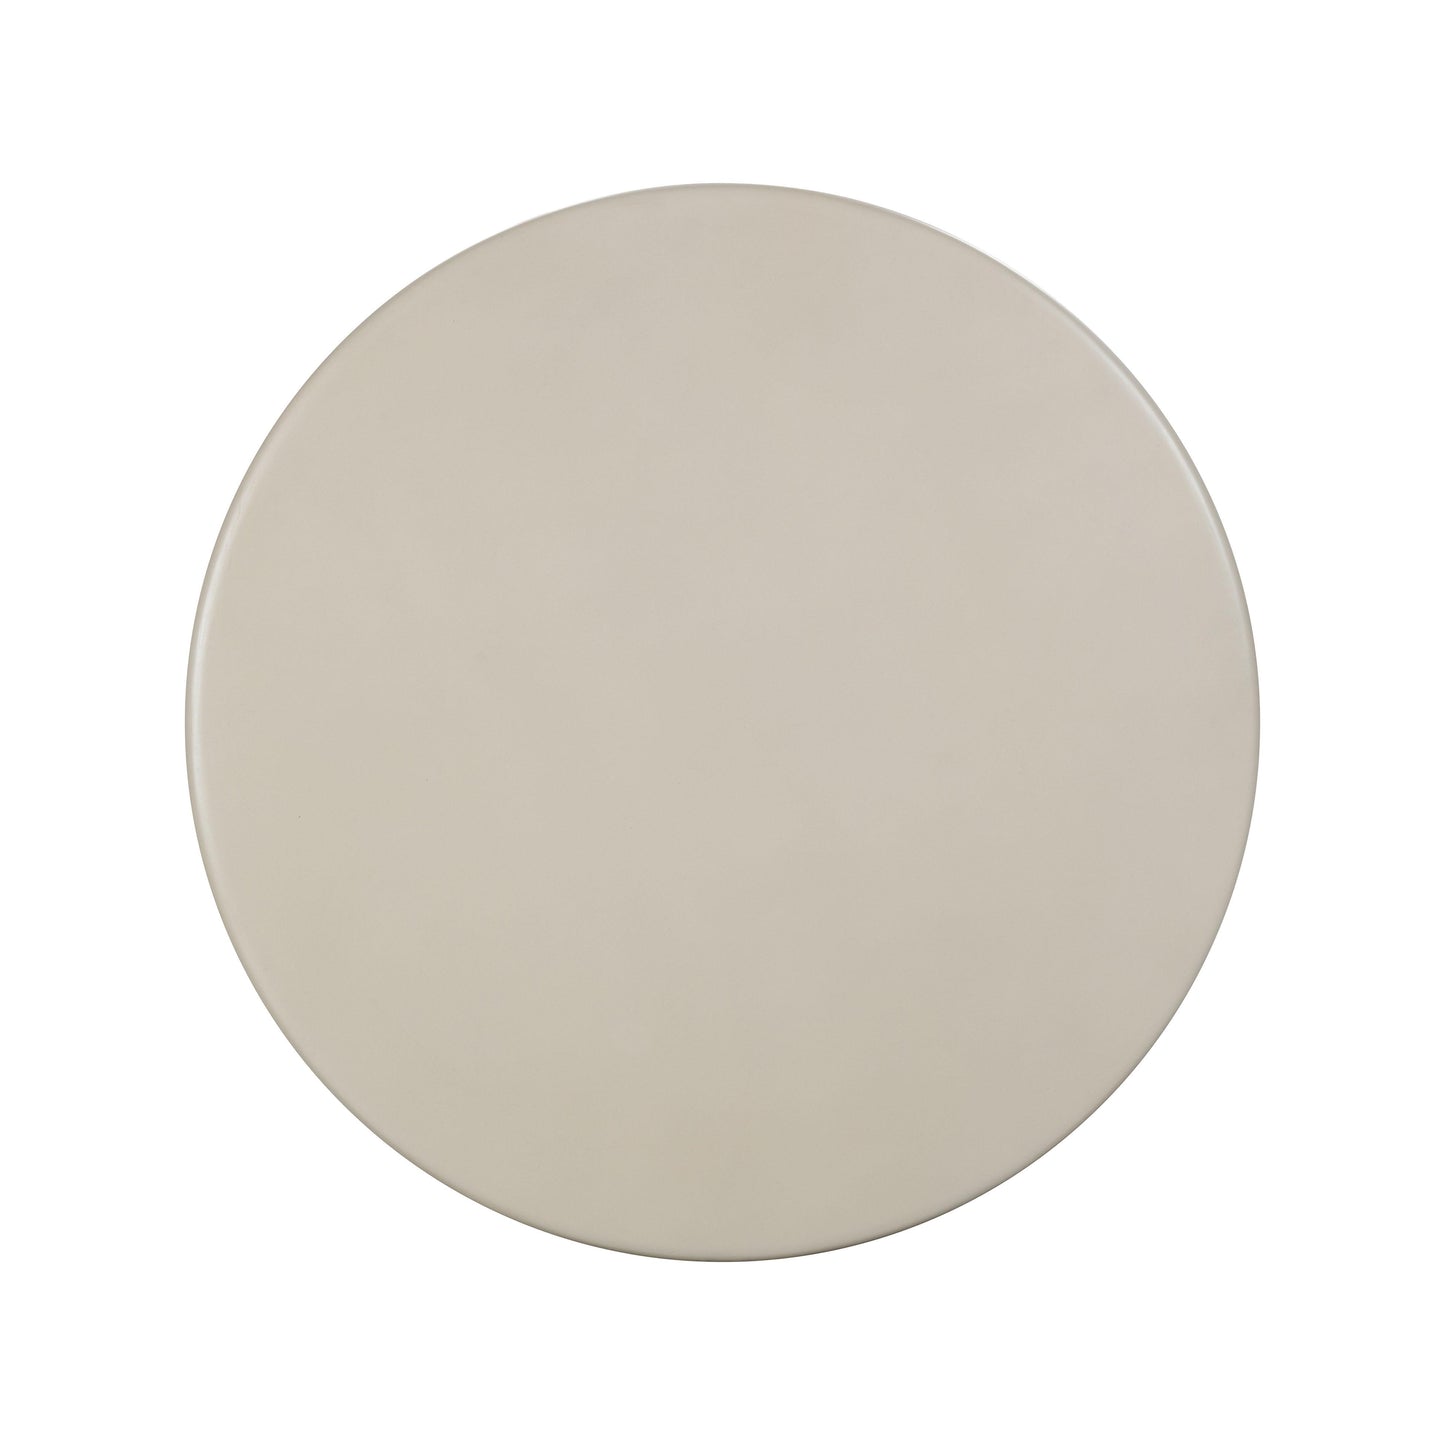 leslie beige textured faux plaster concrete indoor / outdoor round dining table